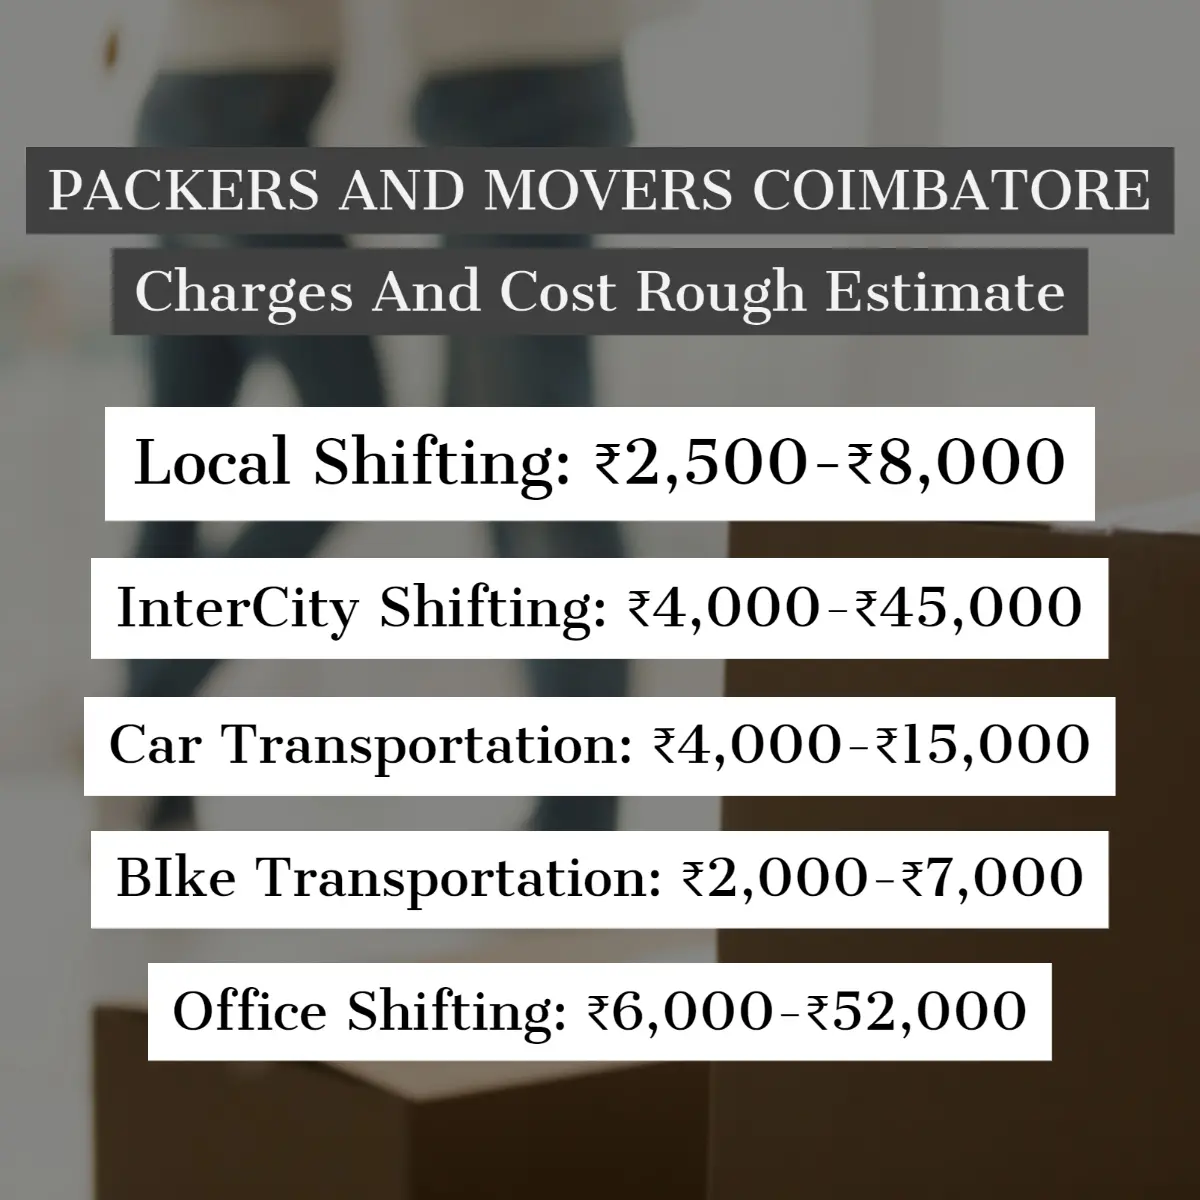 Packers and Movers Coimbatore Charges